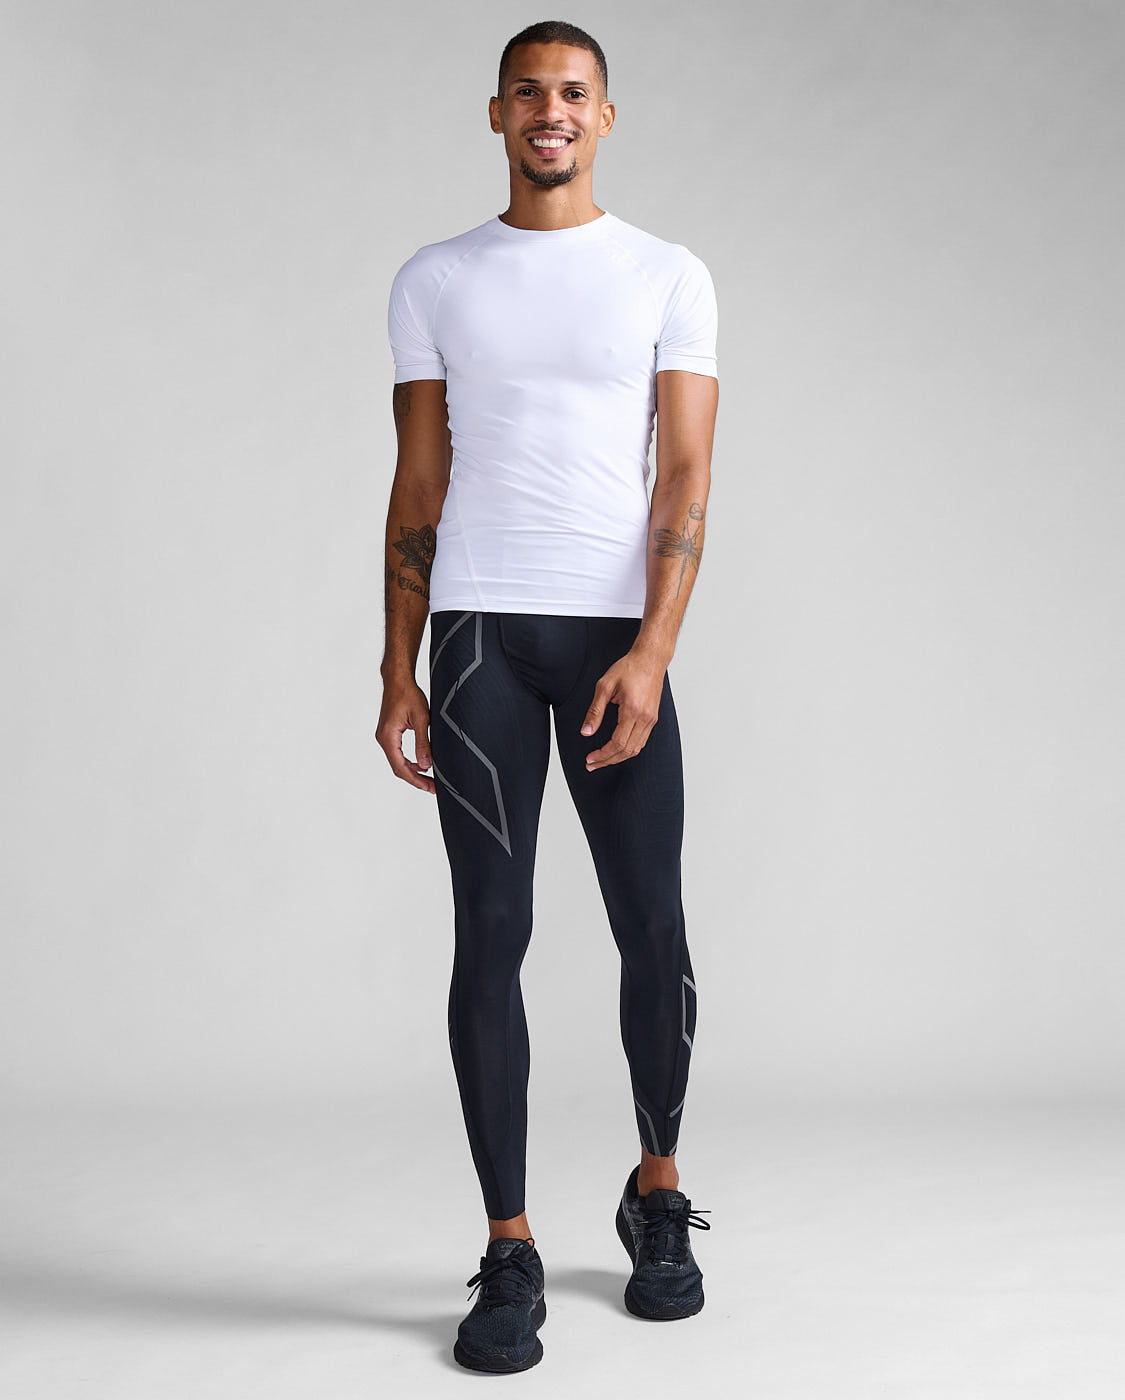 Core Compression Short Sleeve